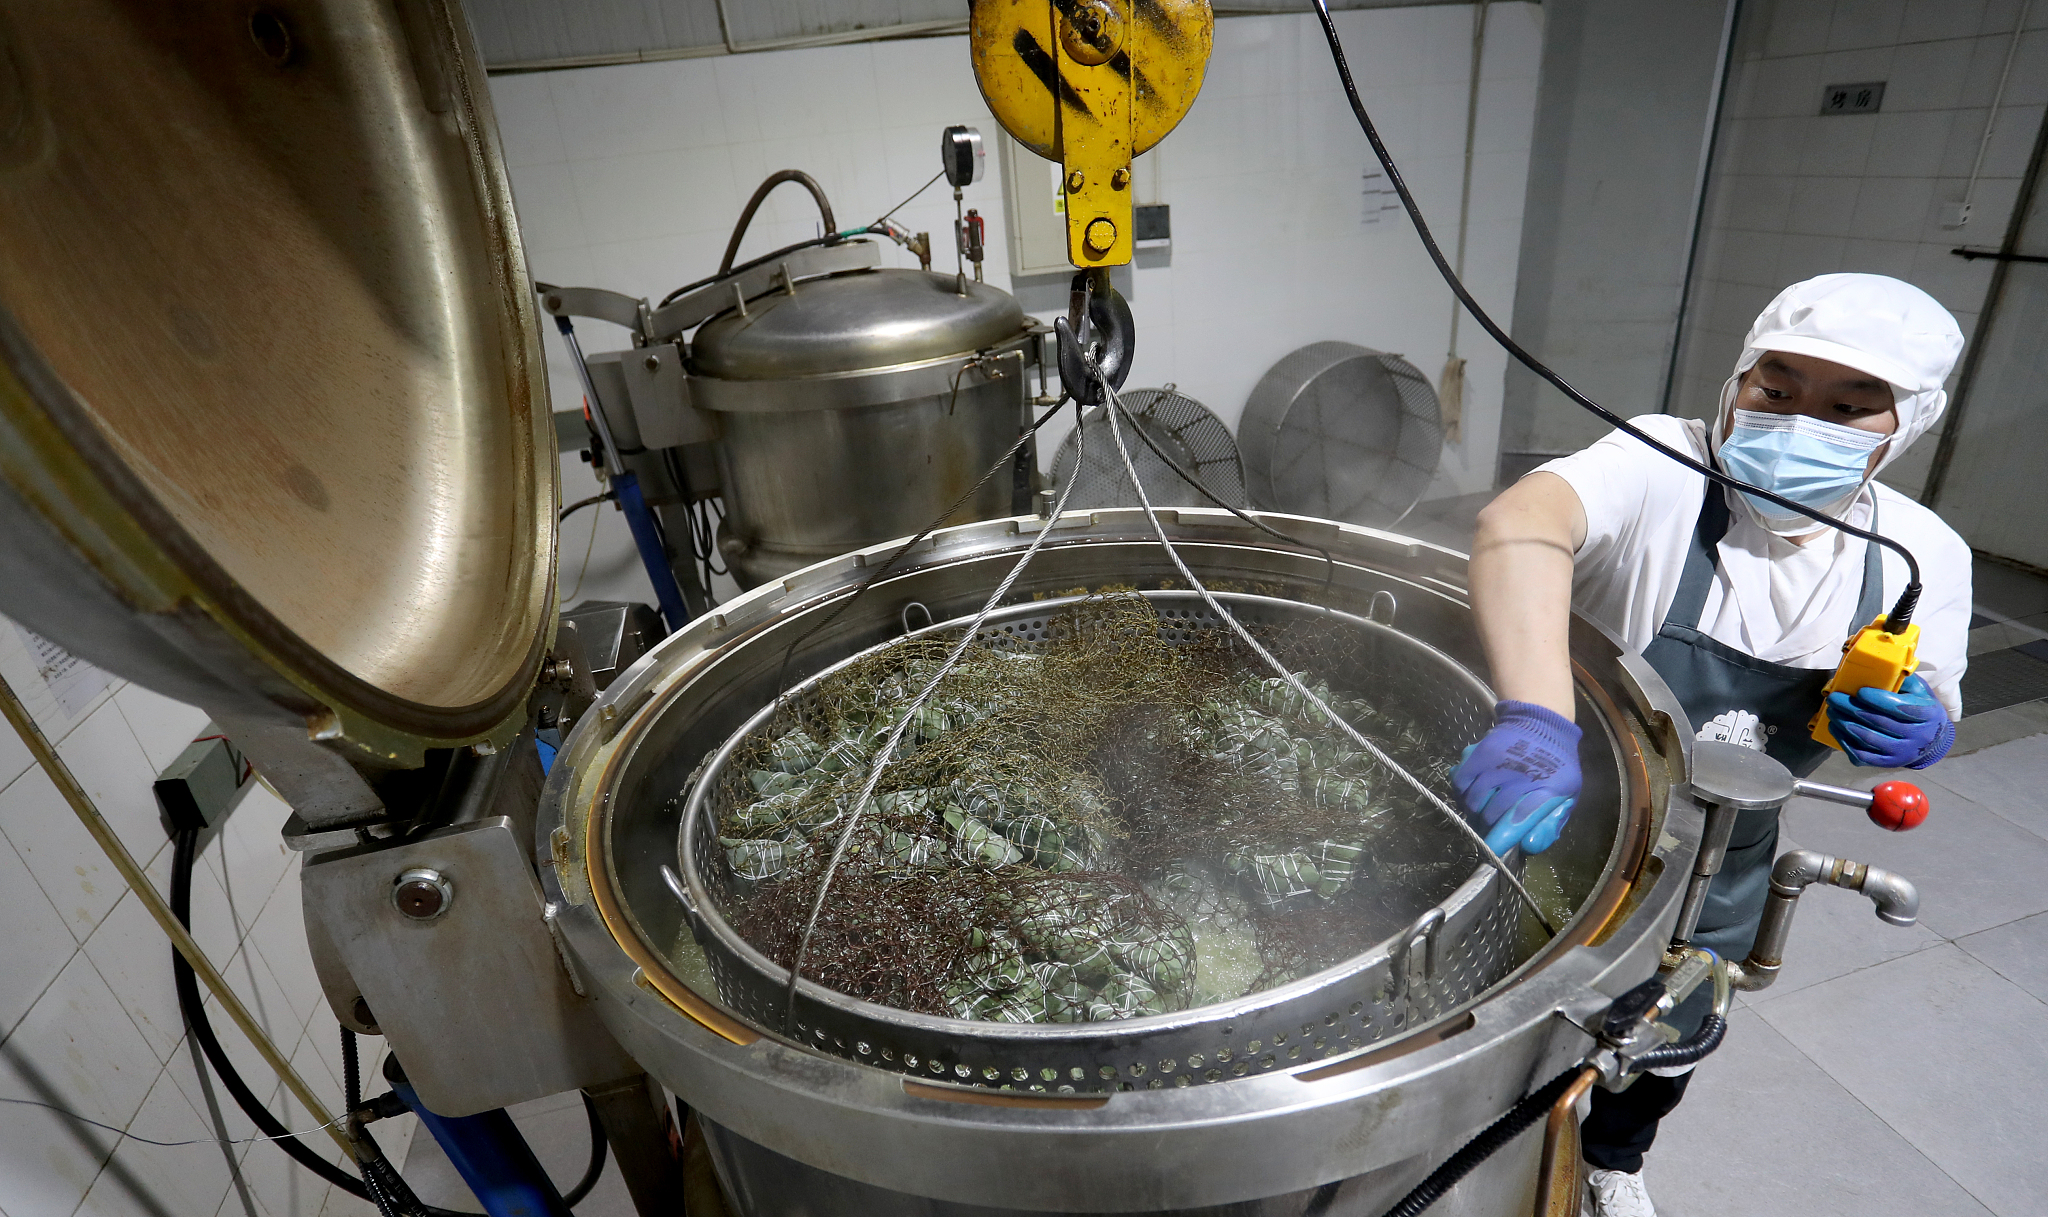 Baskets of rice dumplings are hoisted into a pressure cooker in a food factory in Chengdu, Sichuan Province, southwest China, June 9, 2023. /CFP